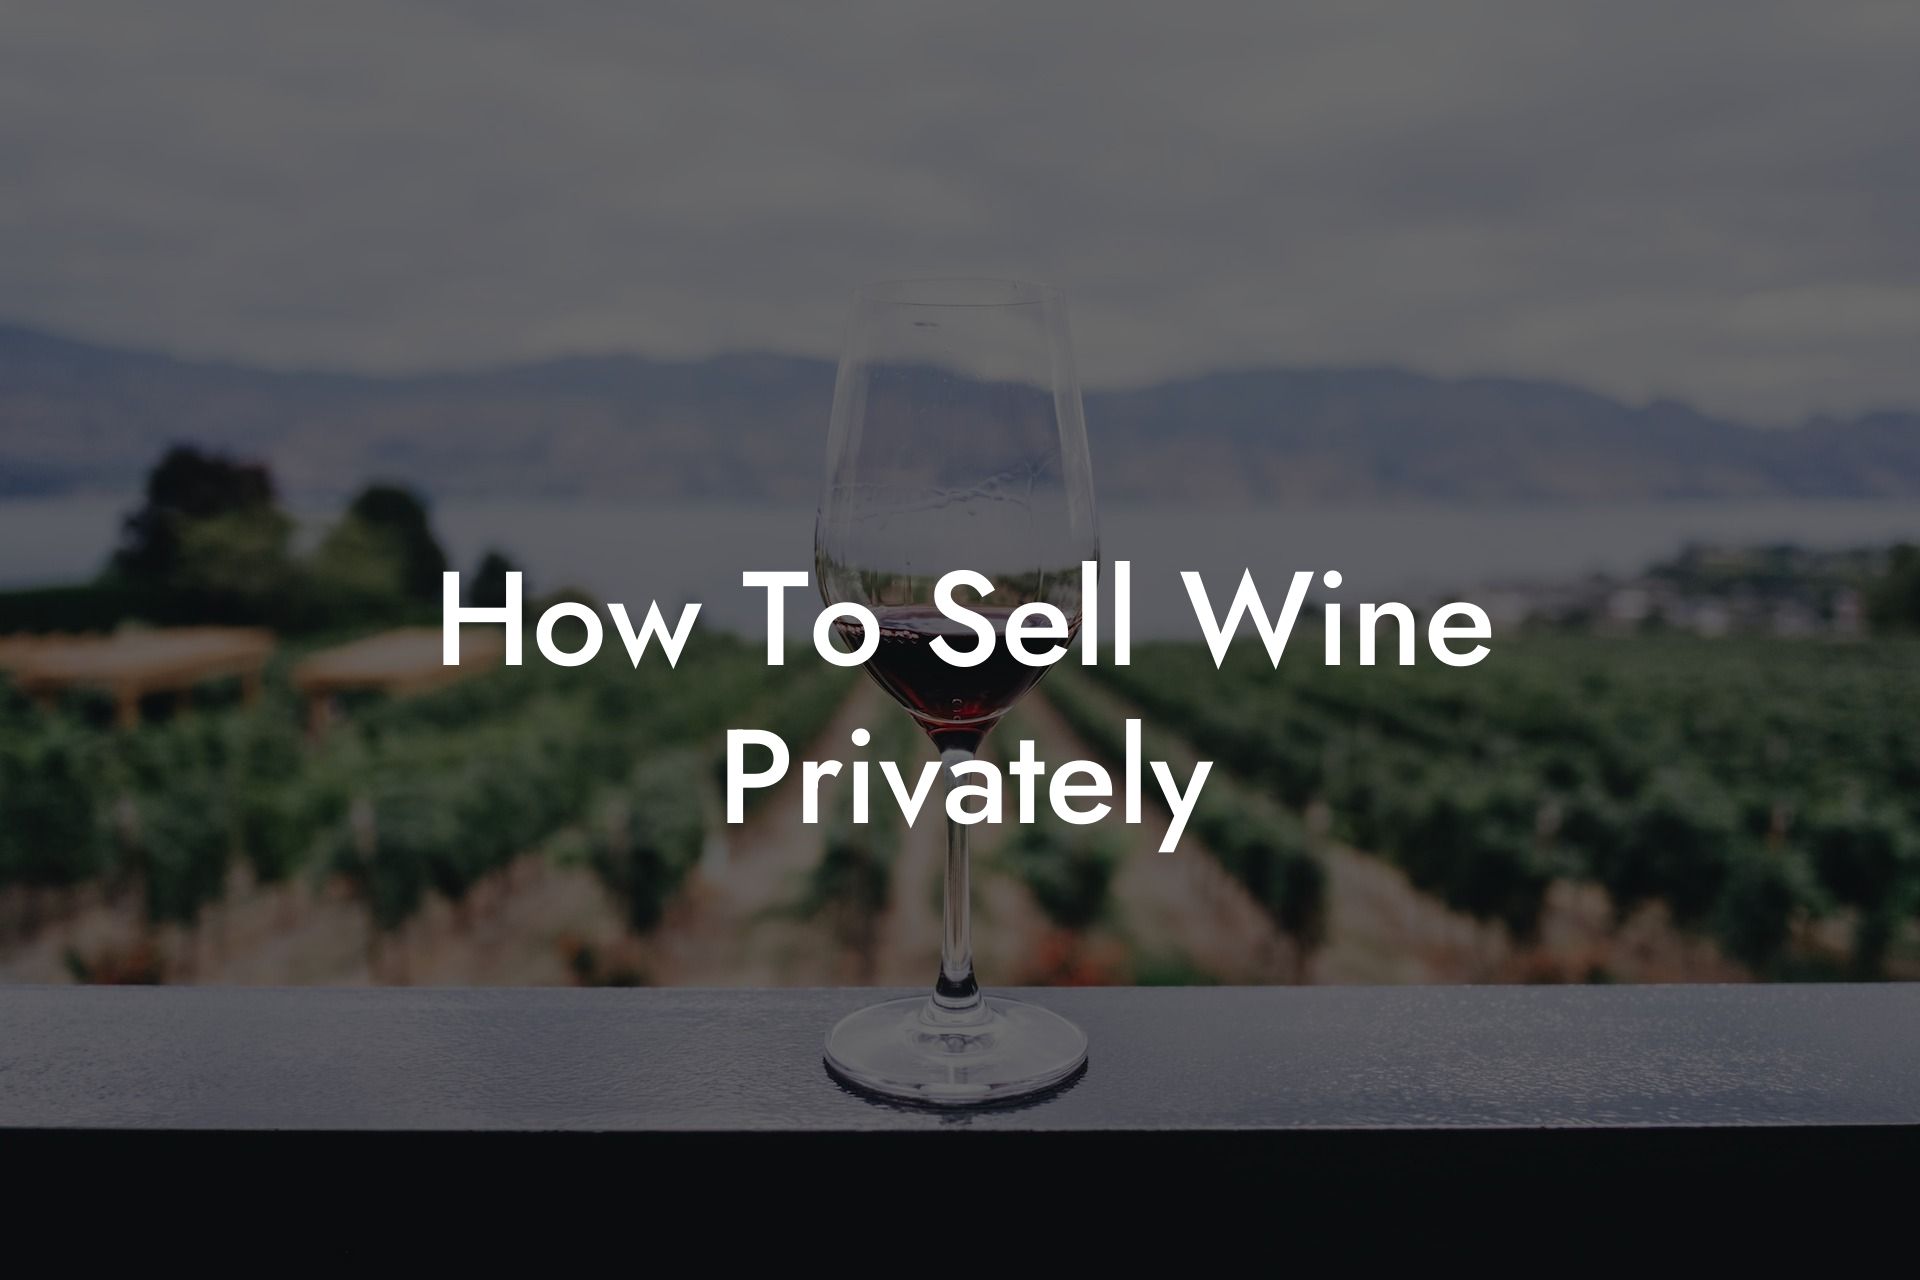 How To Sell Wine Privately